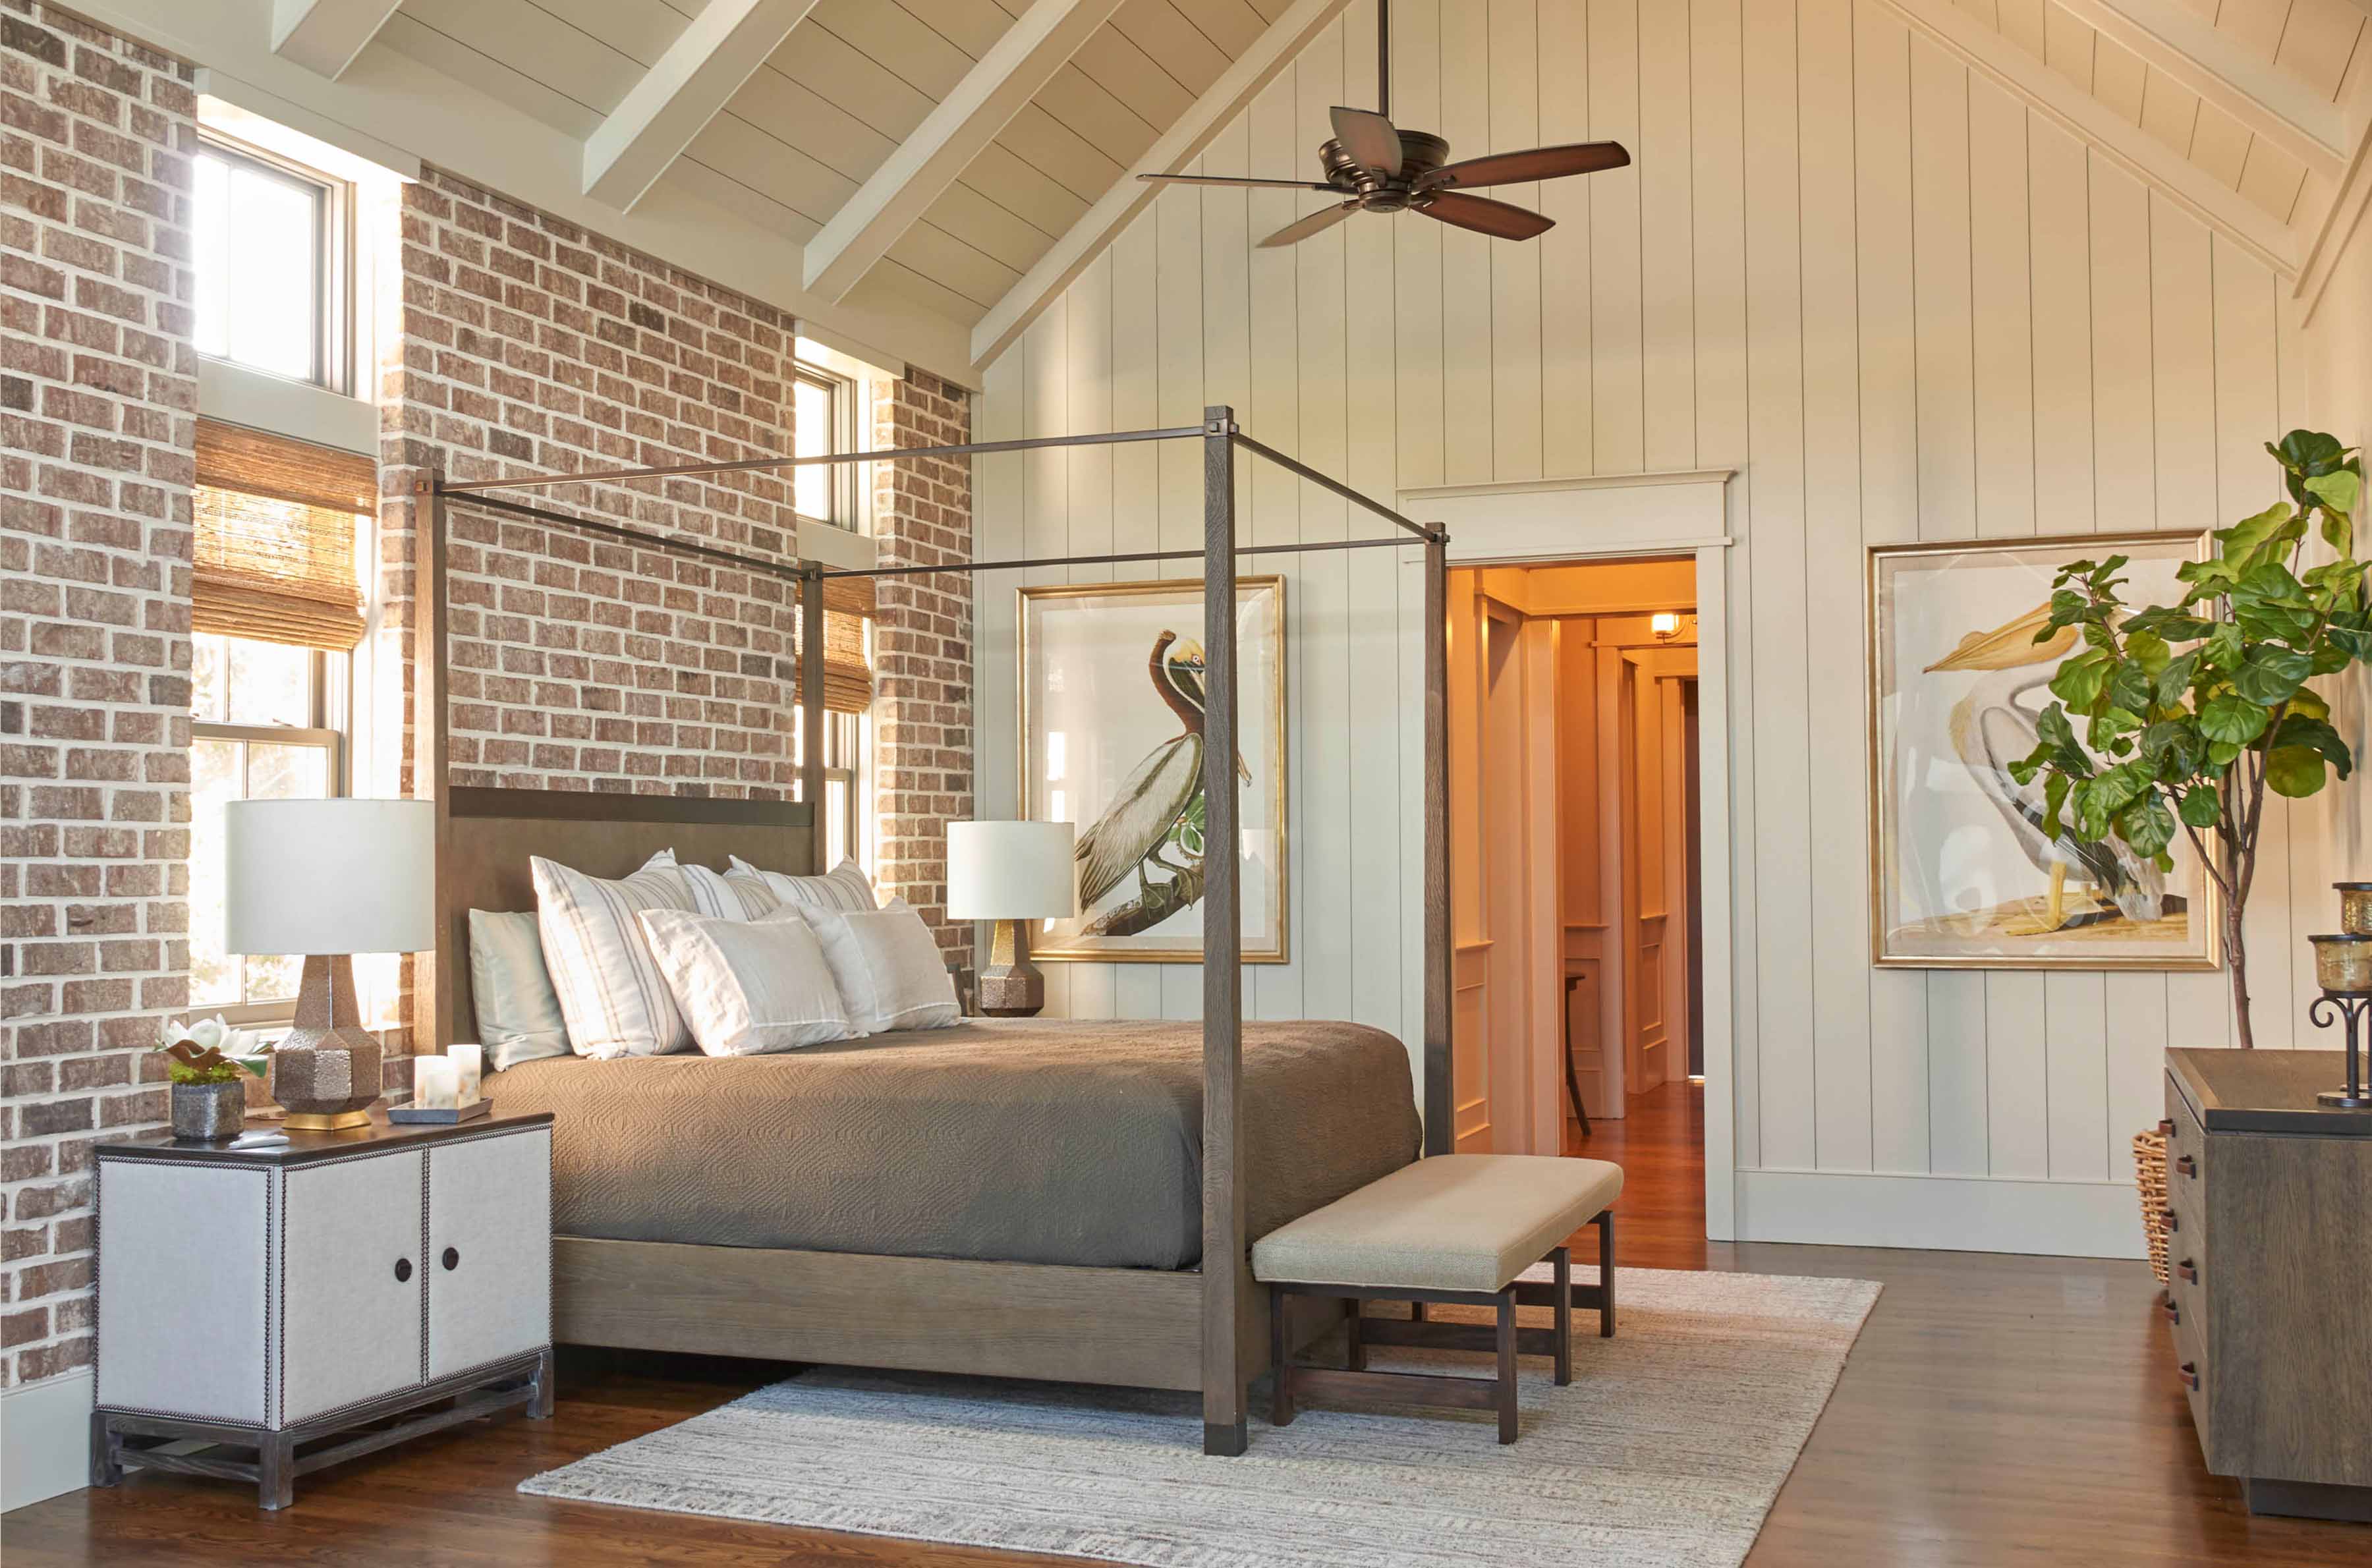 hilton head custom interiors by Lisa Whitley of J Banks Design reflect the surroundings of the low country of South Carolina